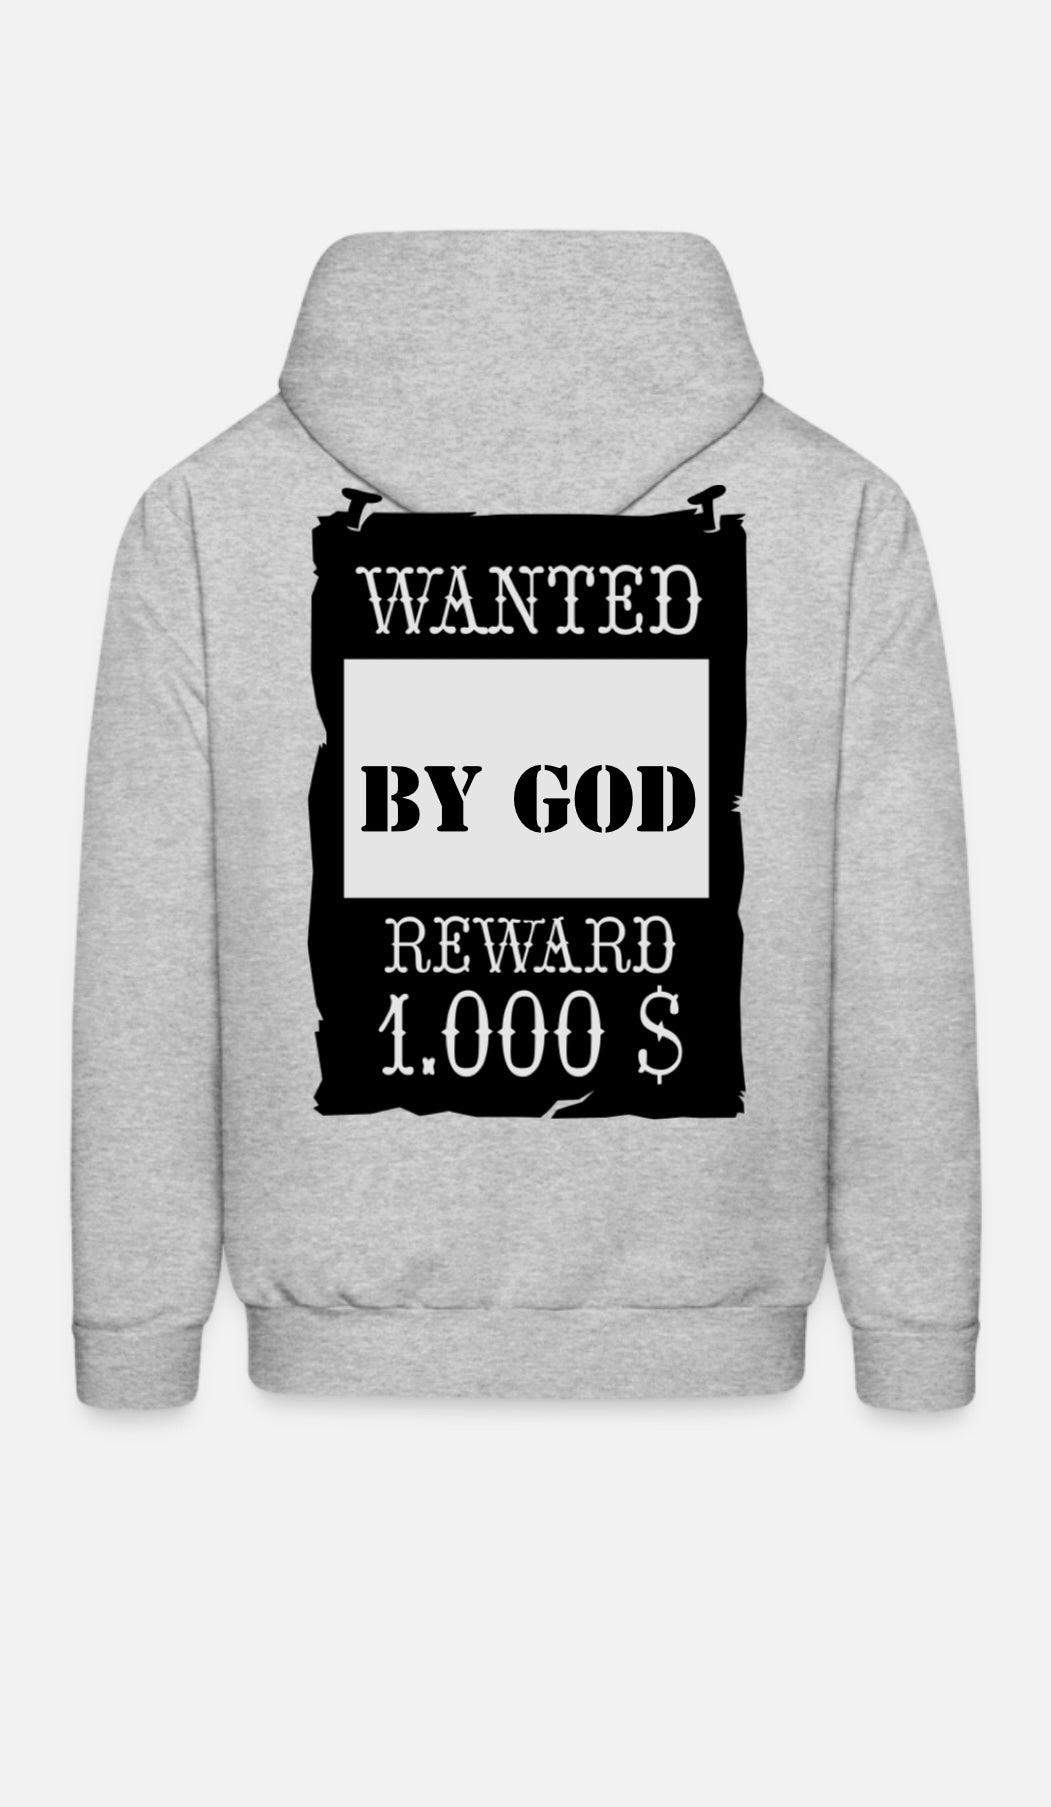 WANTED BY God